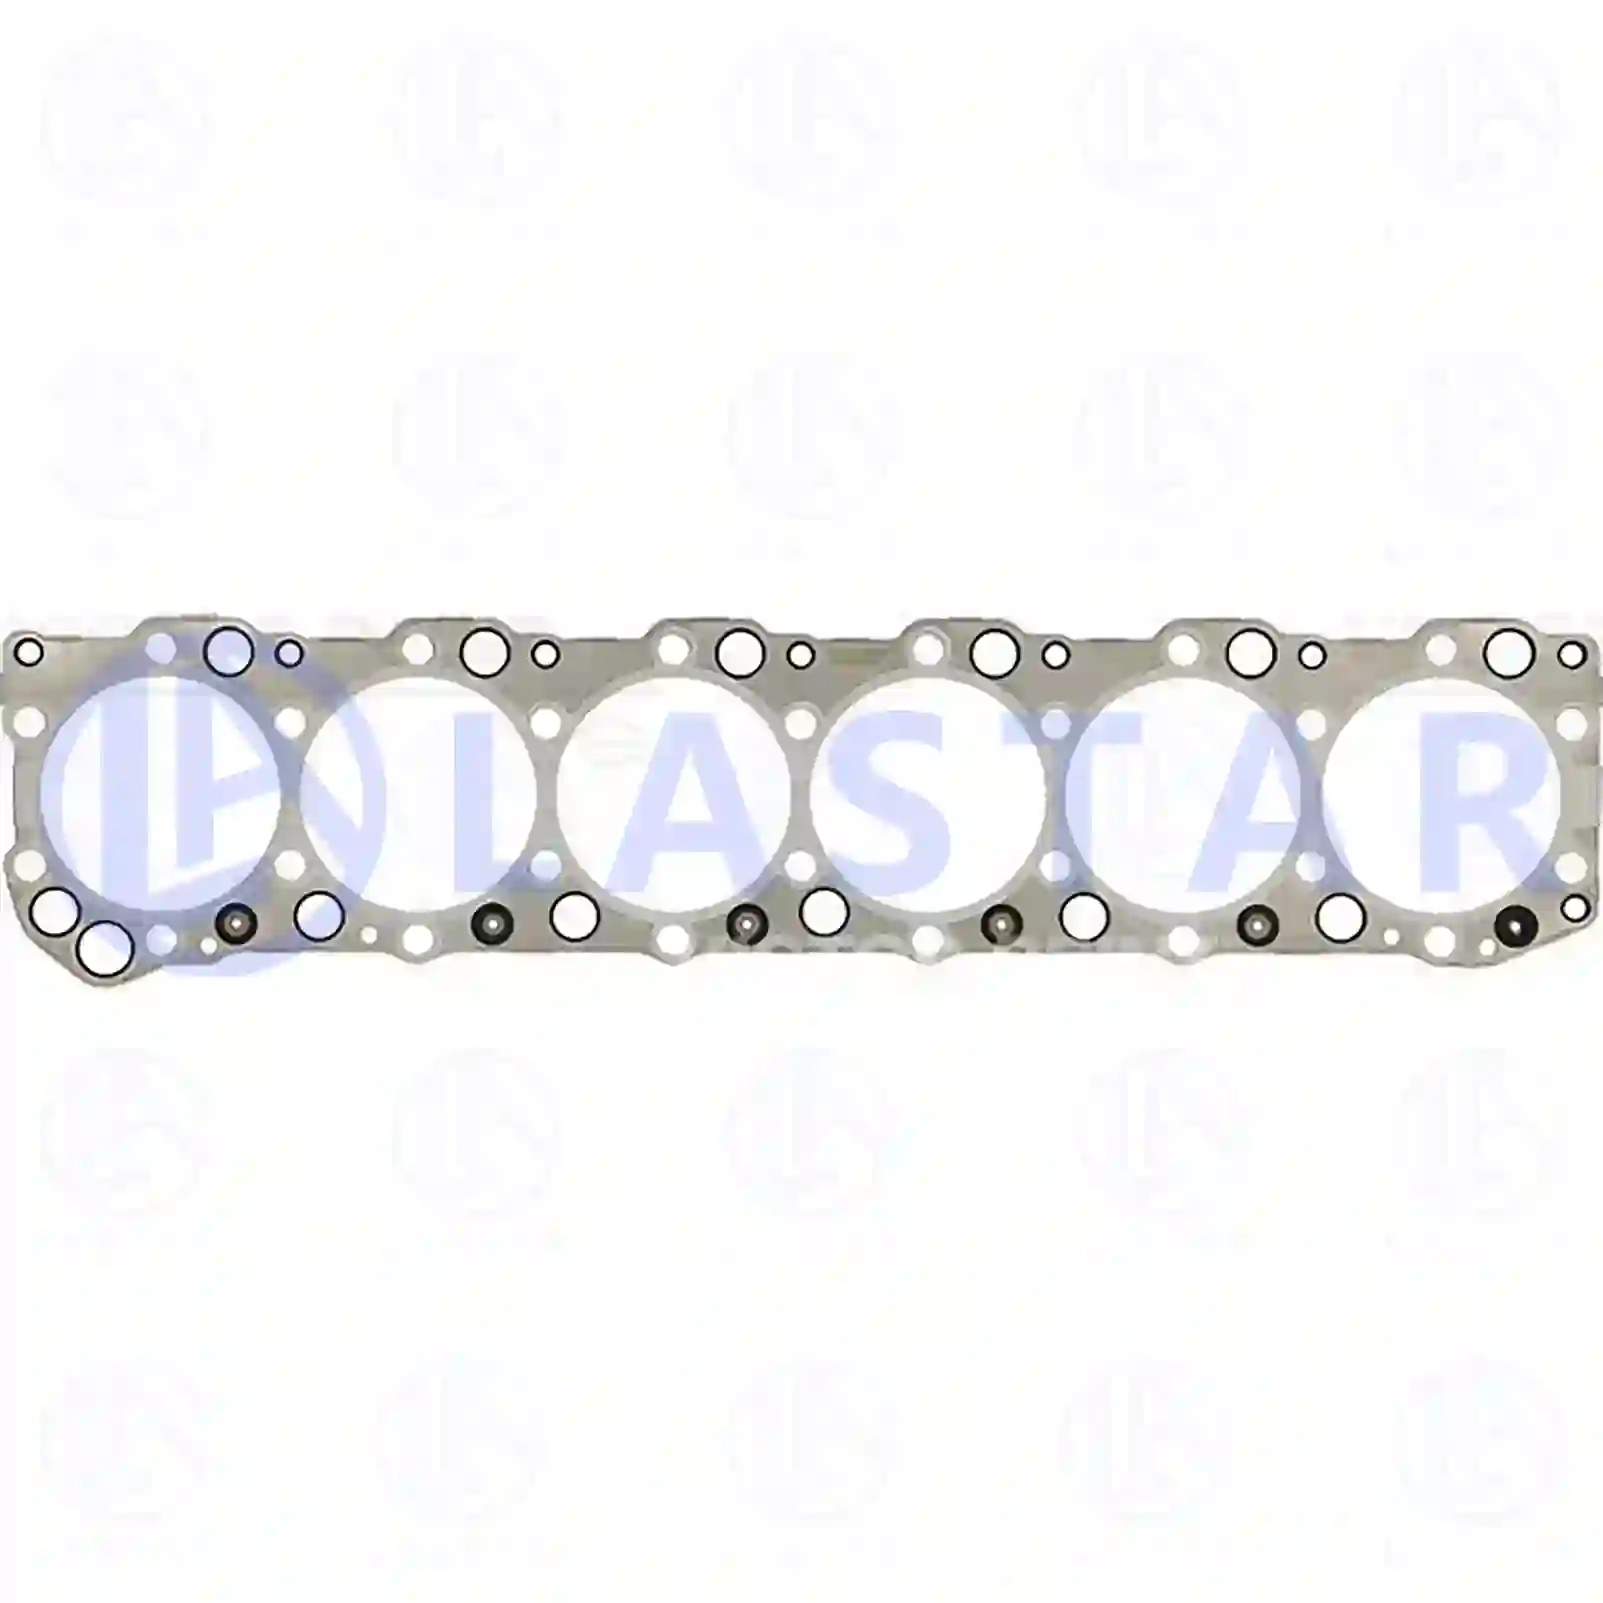  Cylinder head gasket || Lastar Spare Part | Truck Spare Parts, Auotomotive Spare Parts